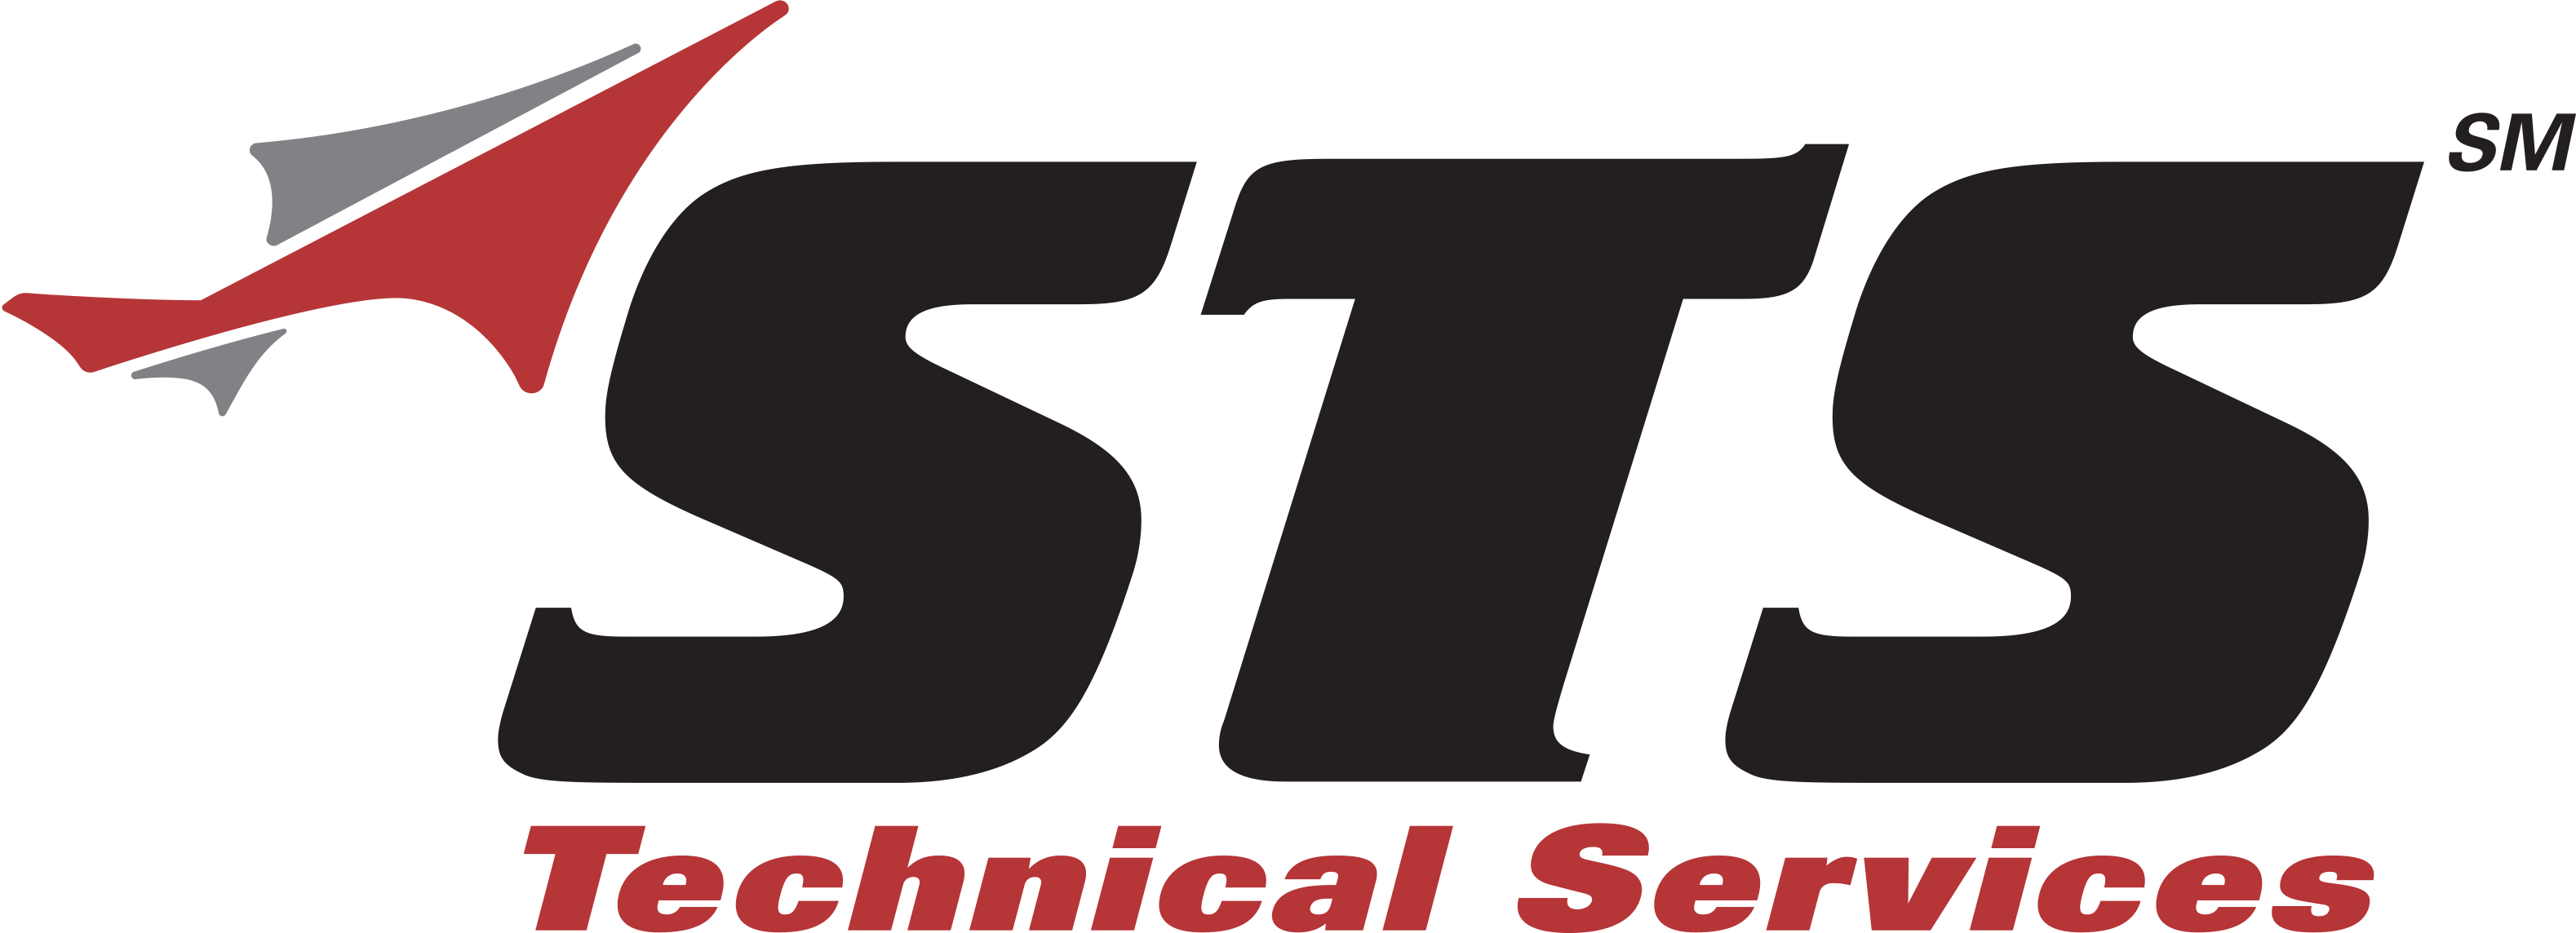 STS Technical Services logo